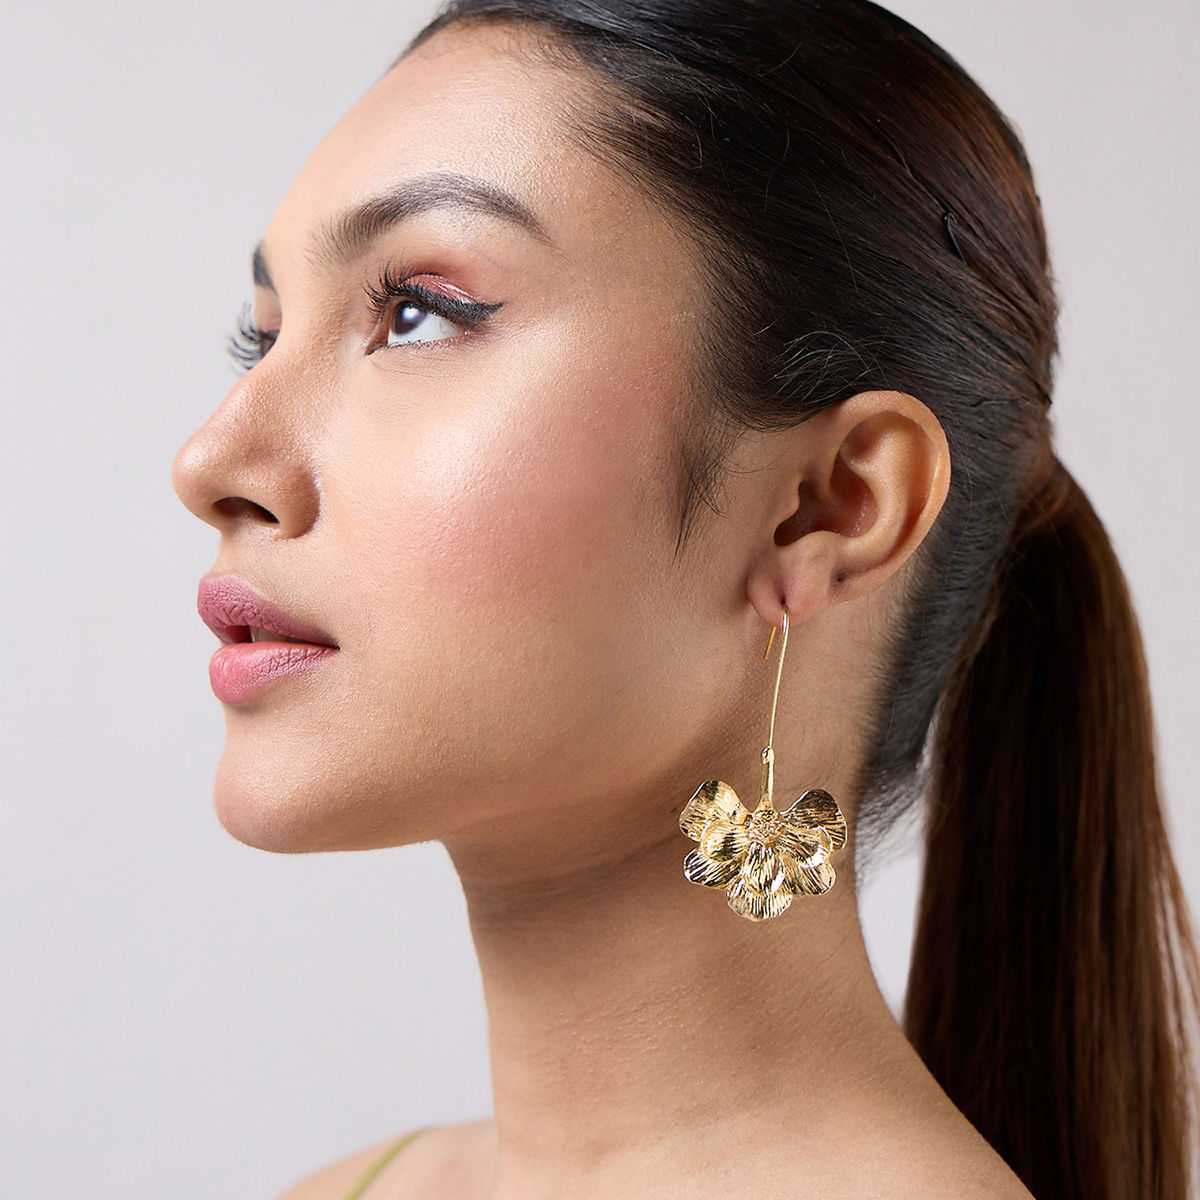 Flipkartcom  Buy ARZONAI Big Gold Flower Dangling Dangle Earrings Large  Size Floral Statement Earring Metal Earring Set Online at Best Prices in  India